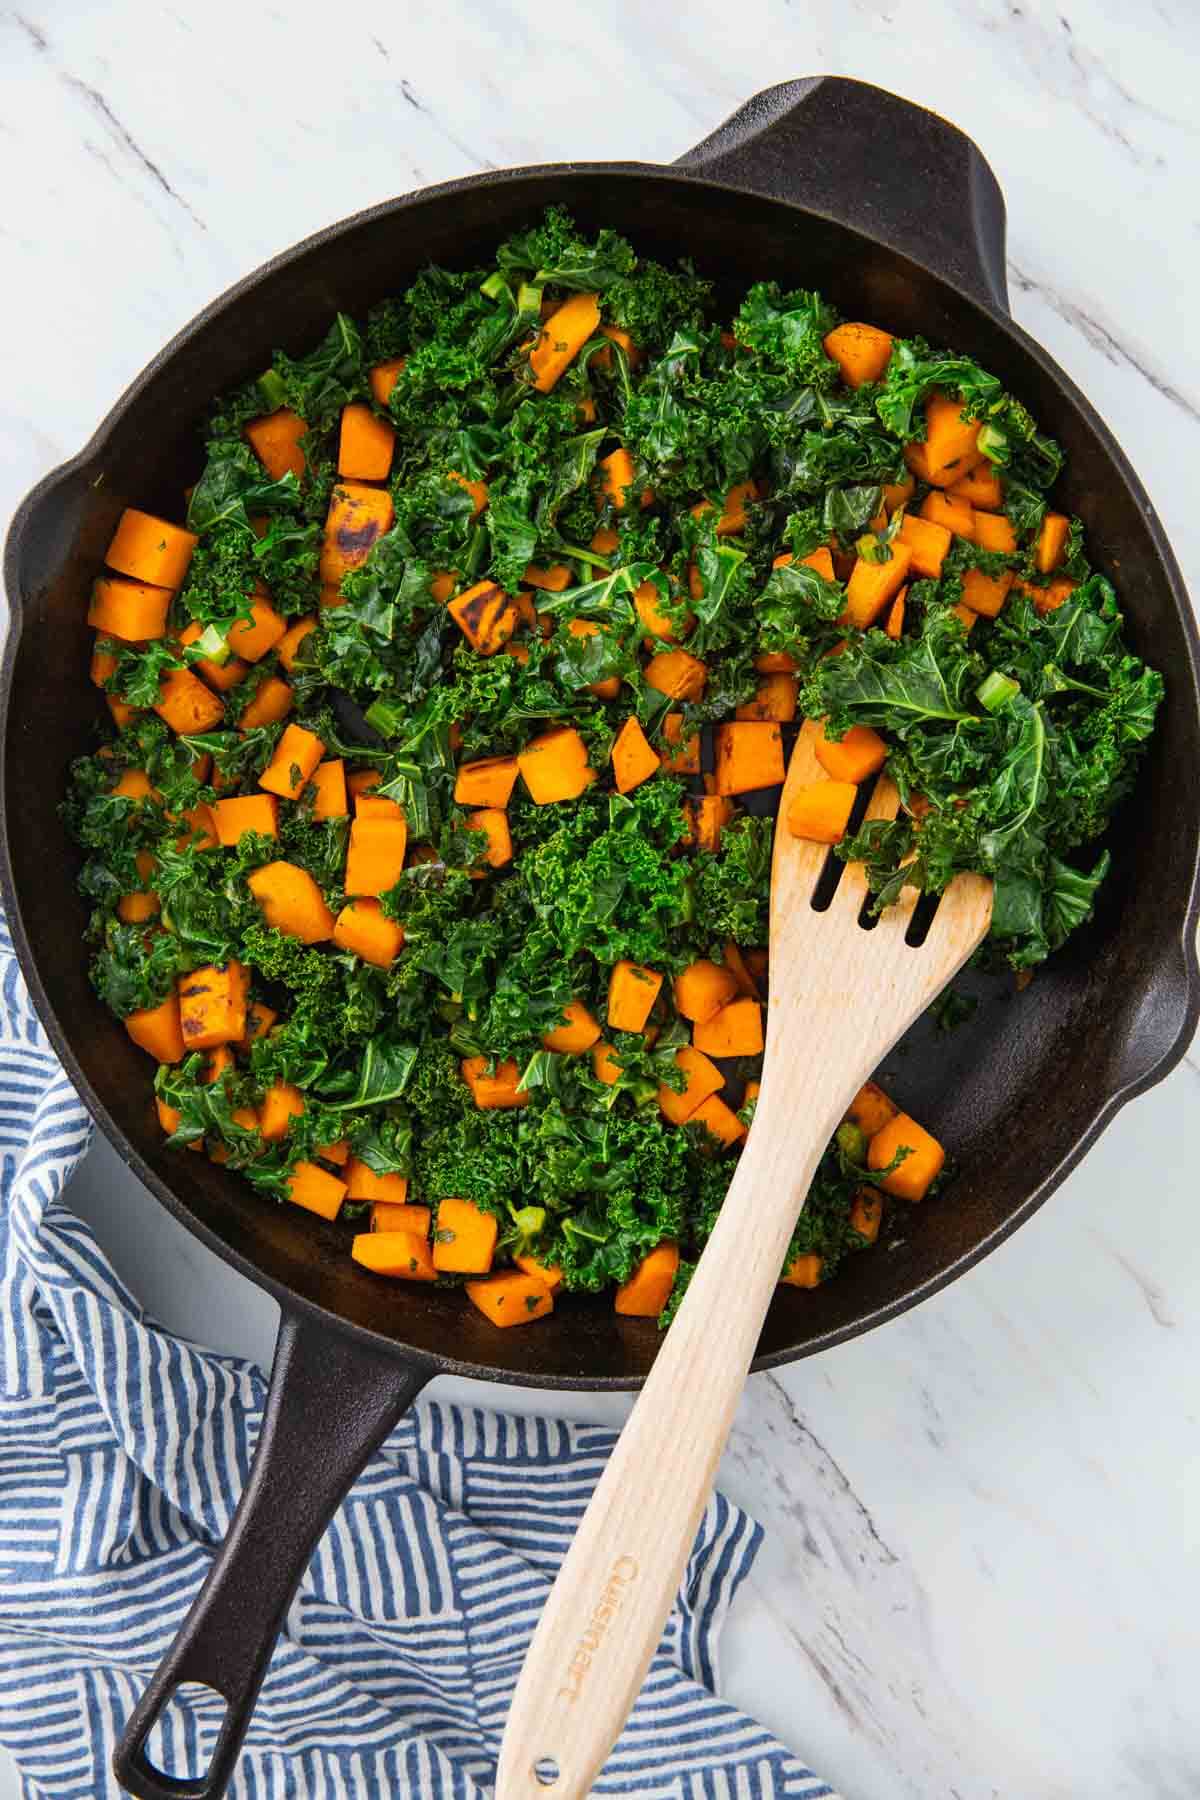 Sweet potato and kale roasted in a cast iron pan.